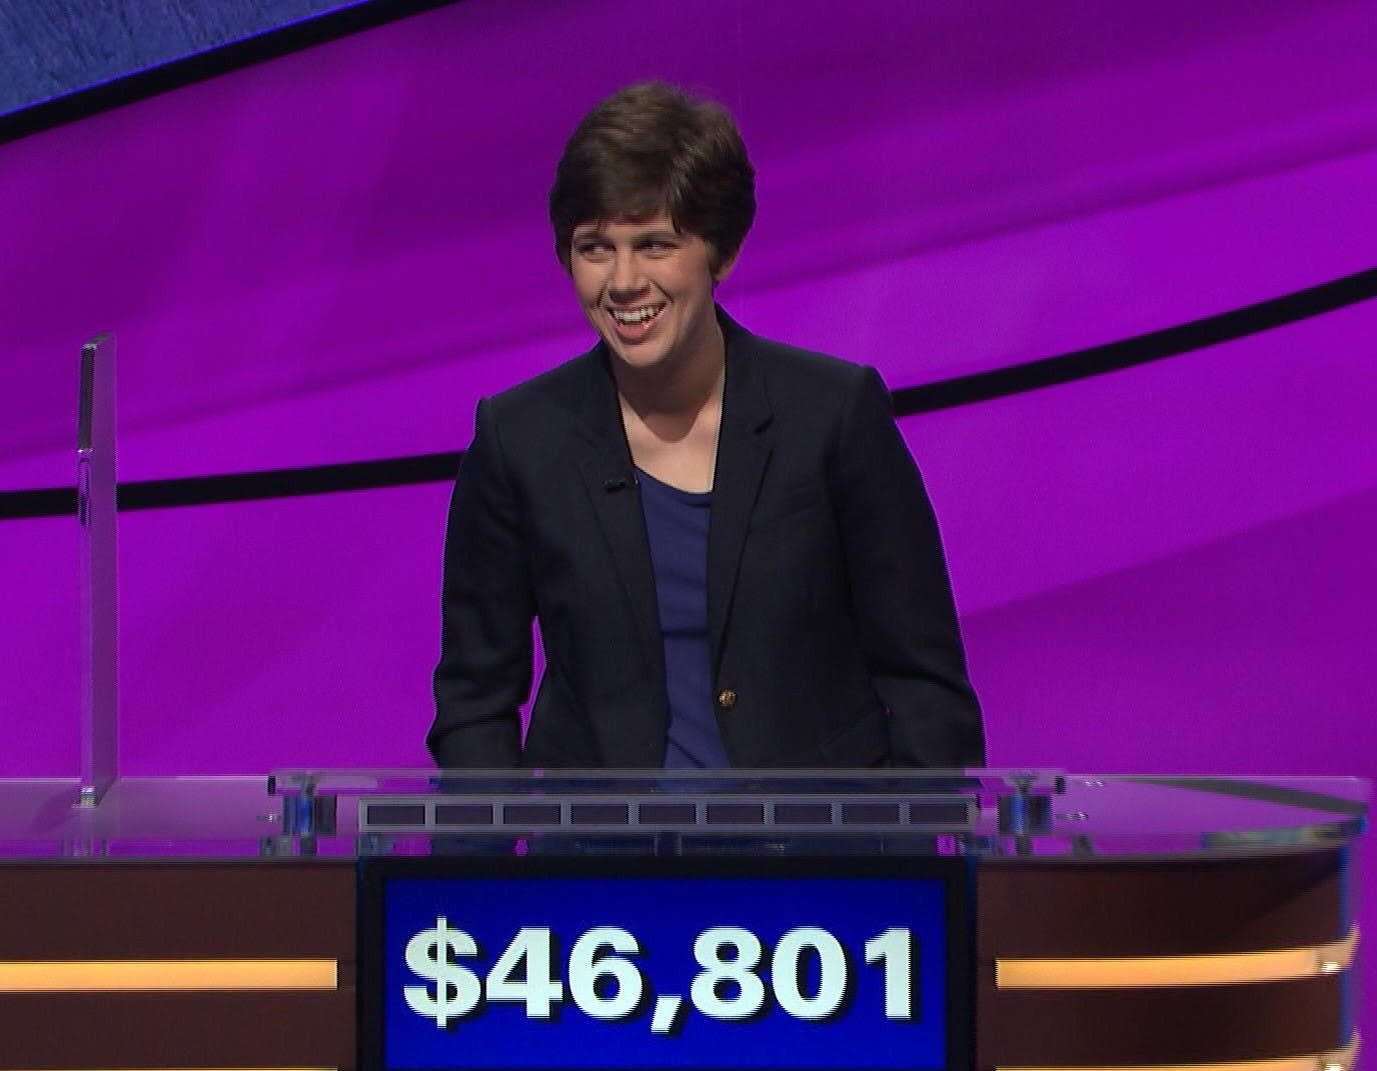 Emma Boettcher, 27, a University of Chicago librarian, beat reigning champ James Holzhauer on 'Jeopardy!' Monday evening before he could surpass Ken Jennings' $2.52 million record. (Jeopardy Productions, Inc.)